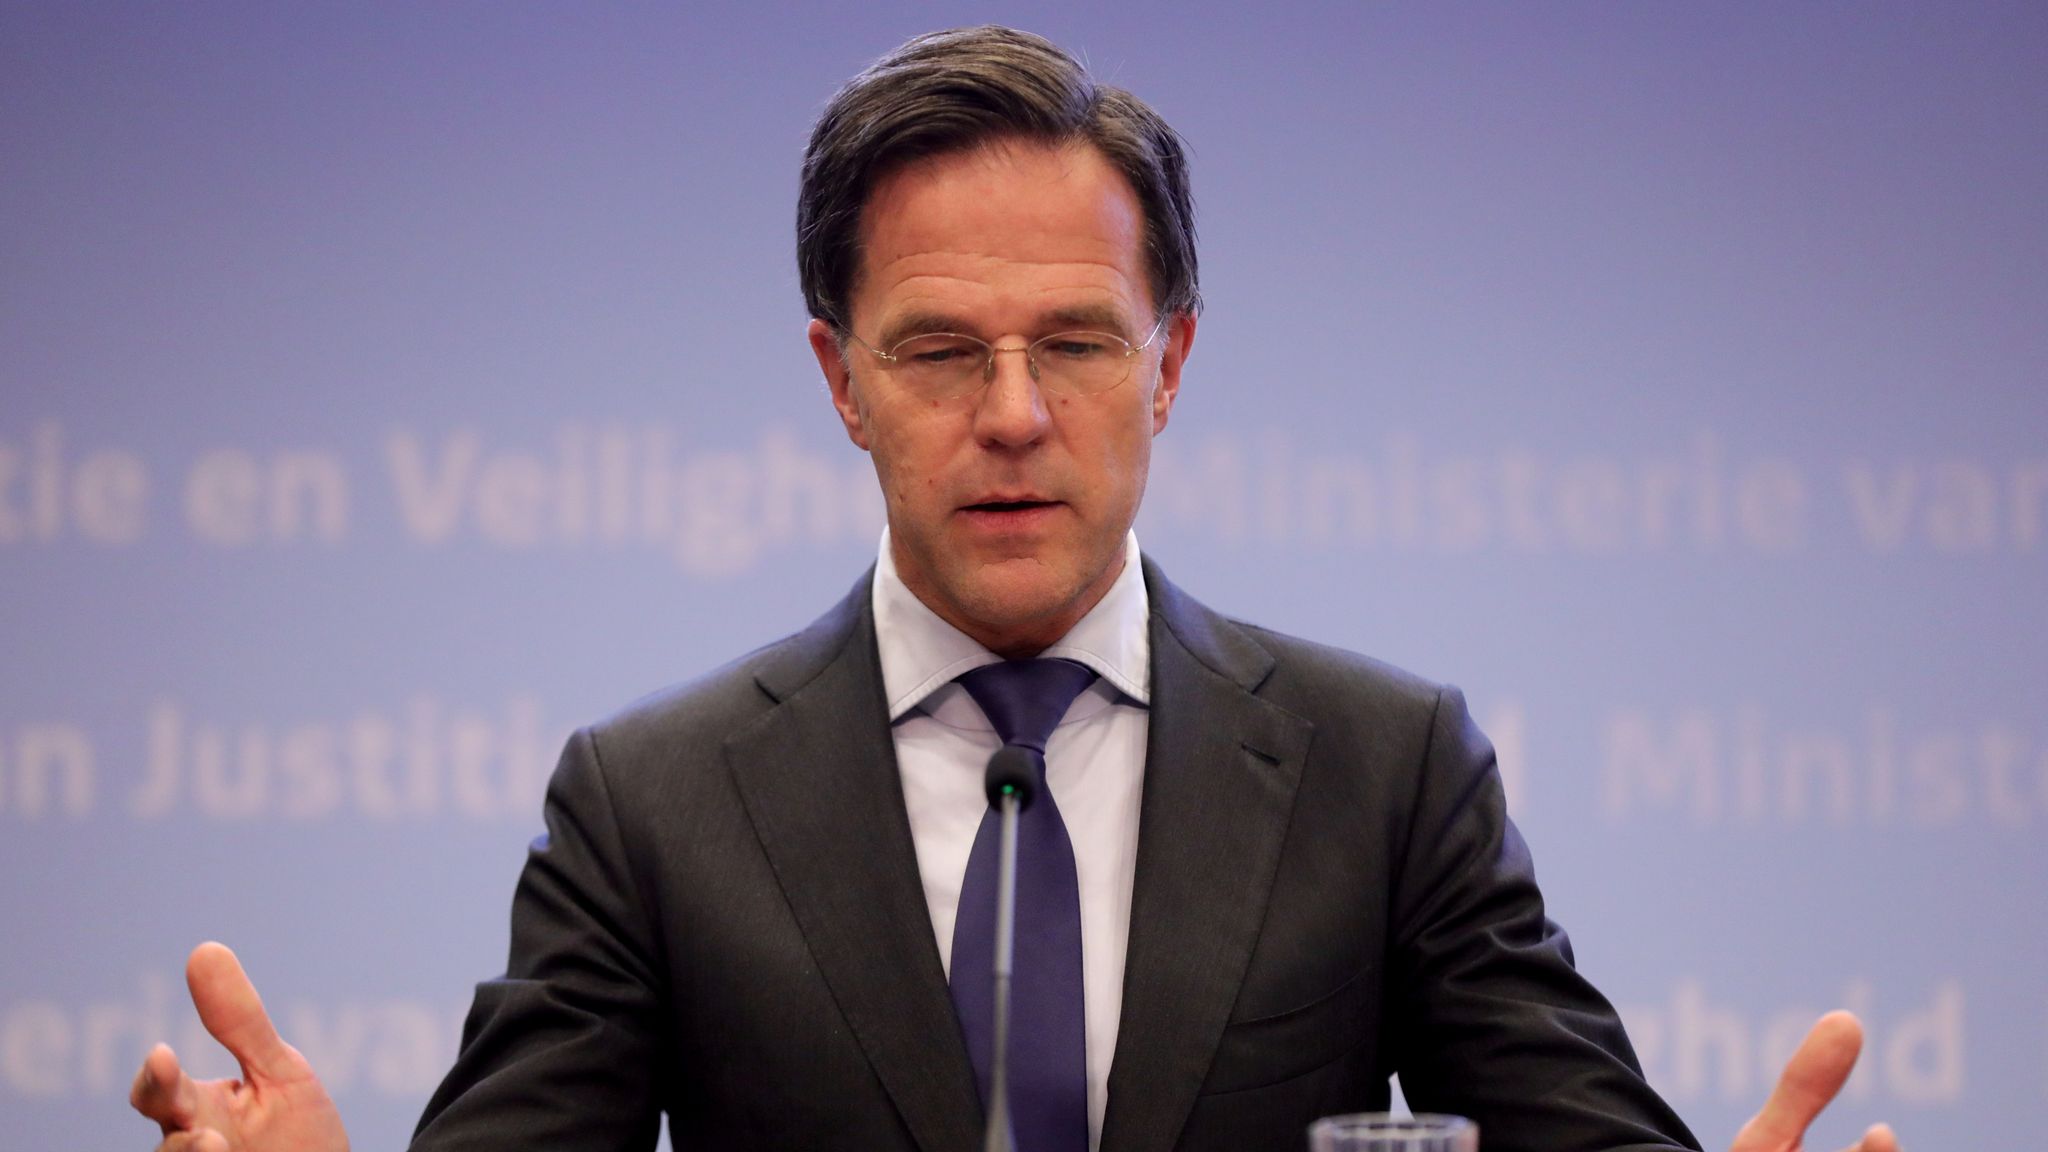 Coronavirus: Dutch Prime Minister Mark Rutte didn't visit dying mother due to lockdown restrictions | World News | Sky News